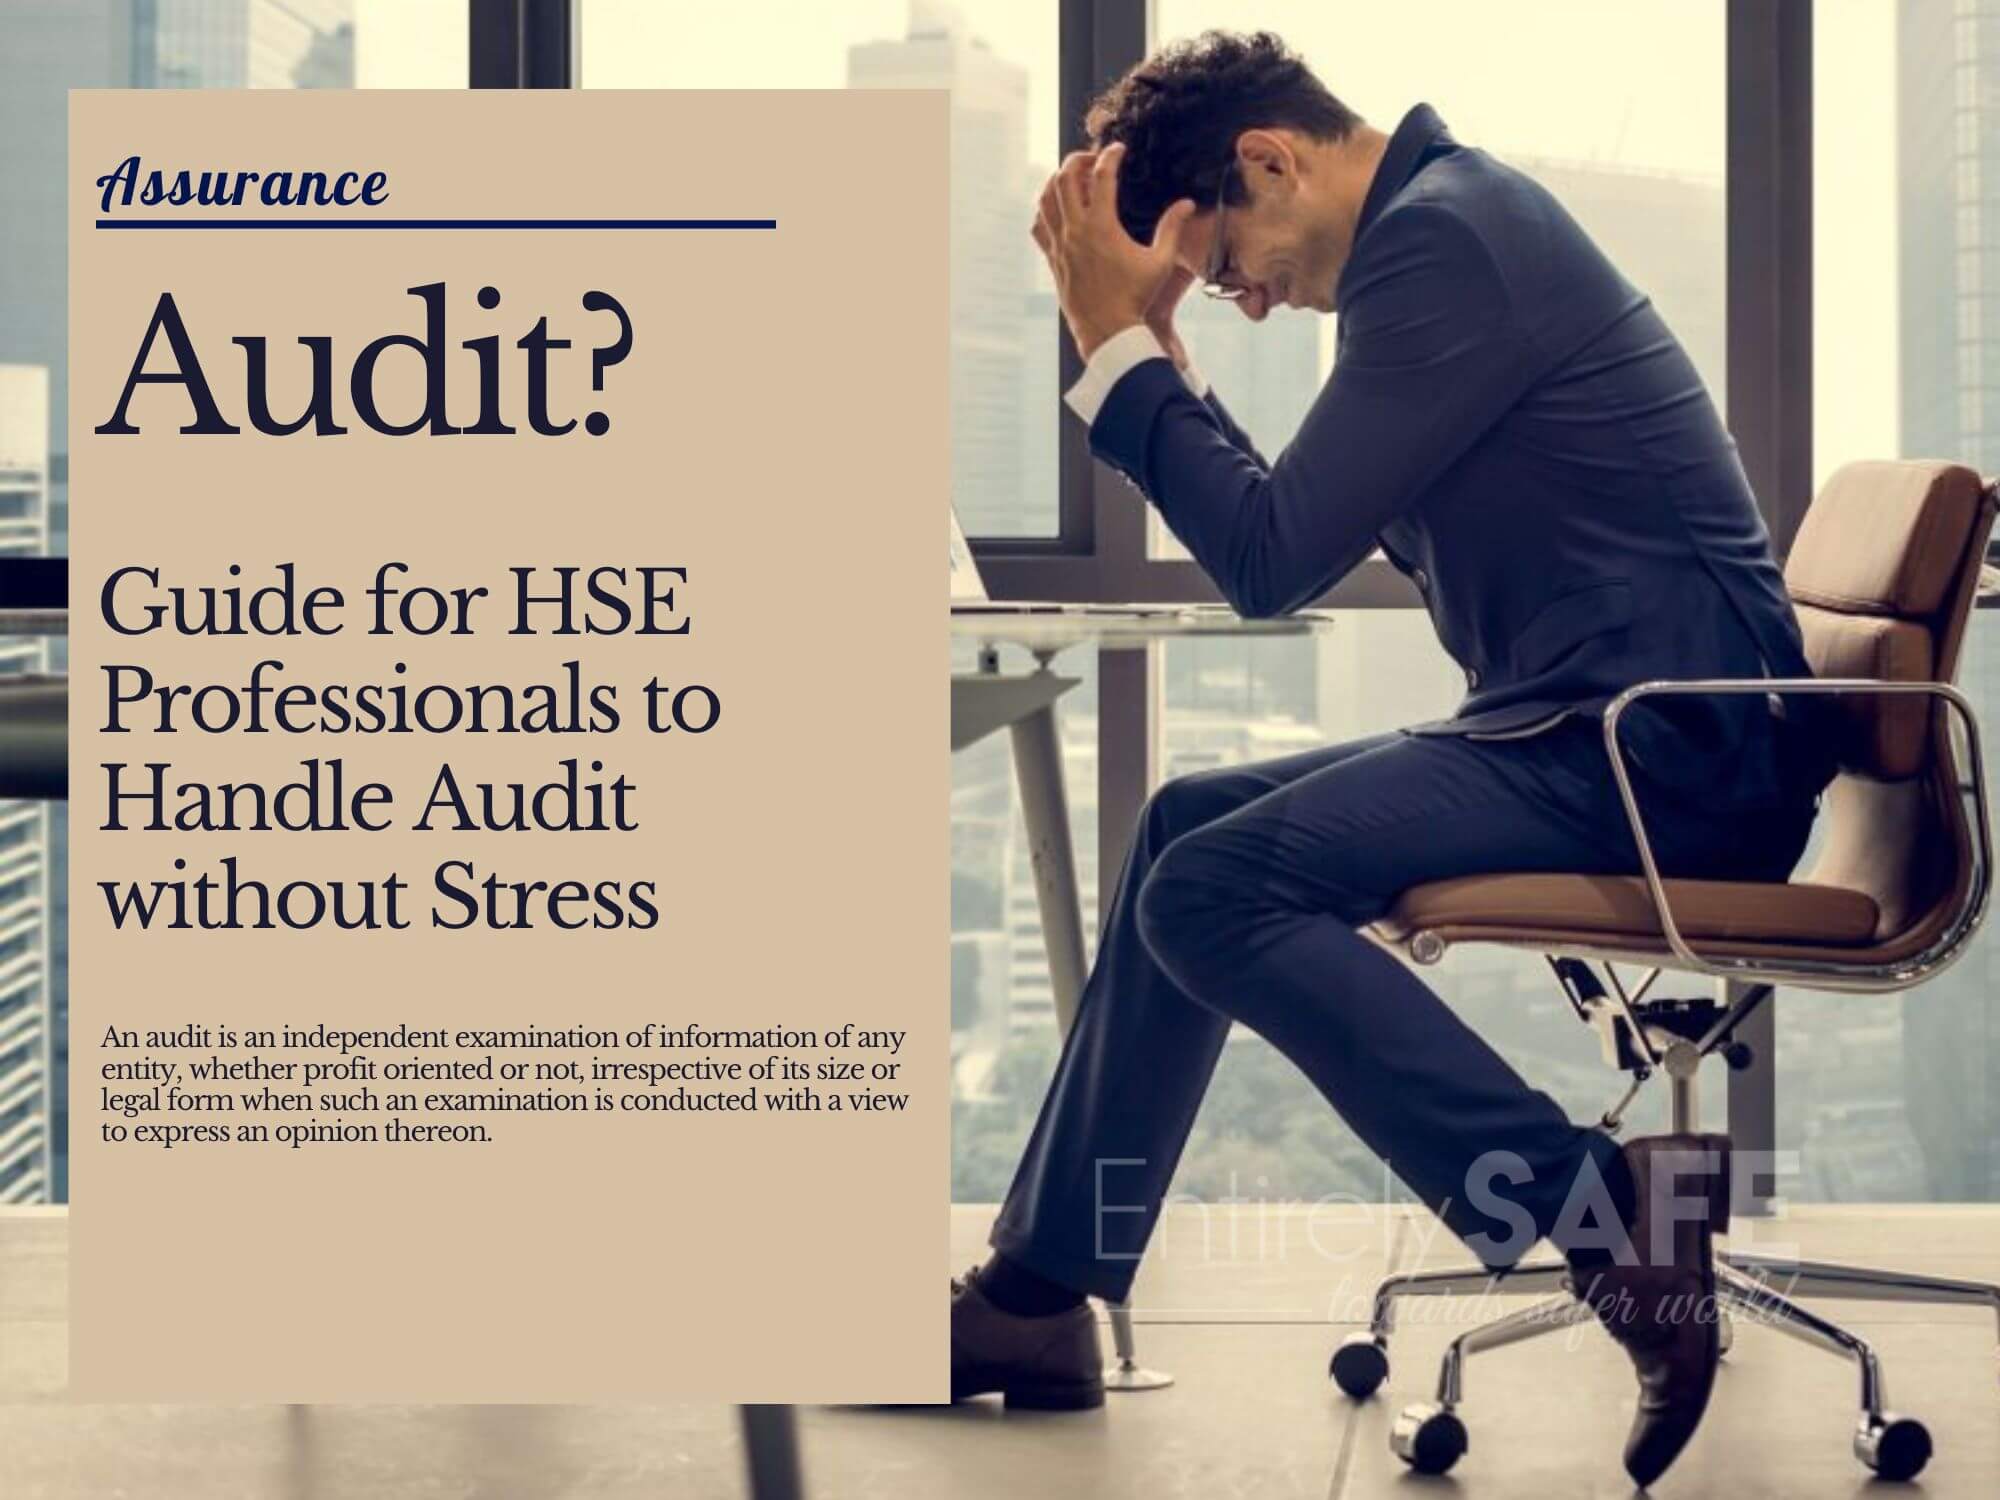 Health and Safety Audit - Guide for HSE Professionals on how to handle it without stress